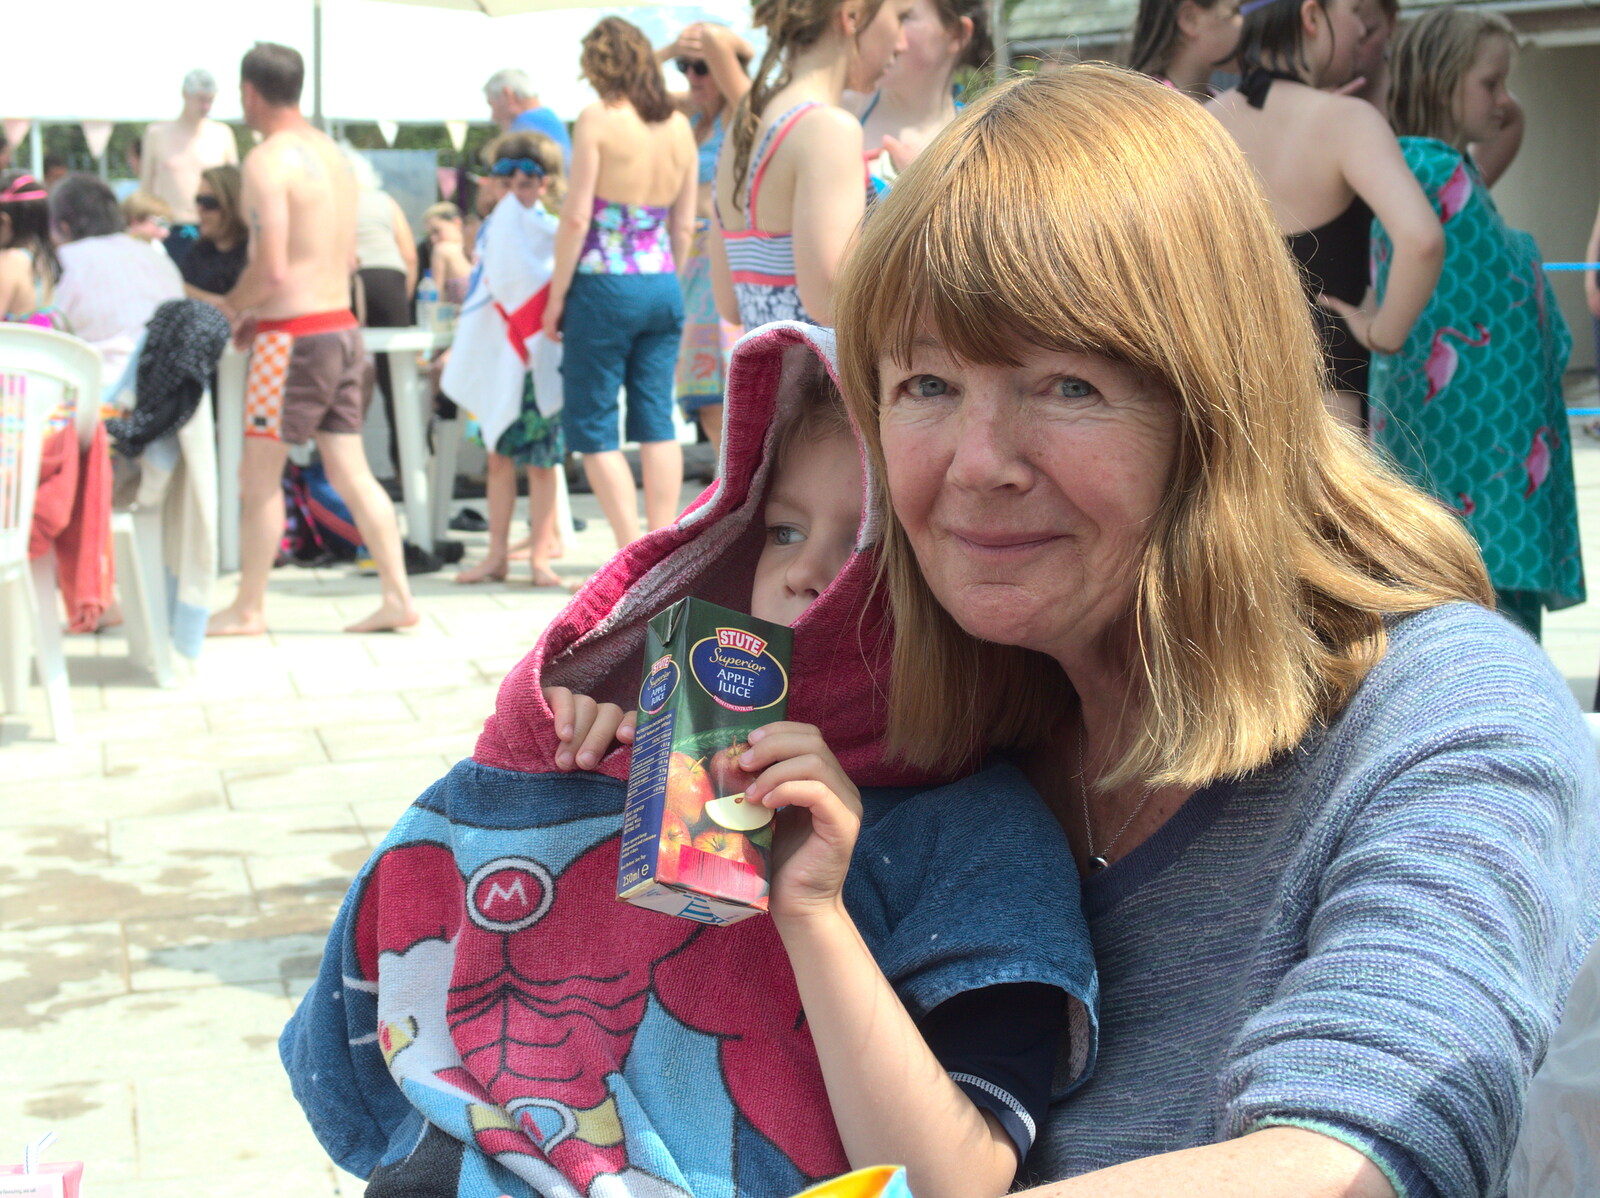 Grandma J with Harry from The Grand Re-opening of the Chagford Lido, Chagford, Devon - 28th May 2016